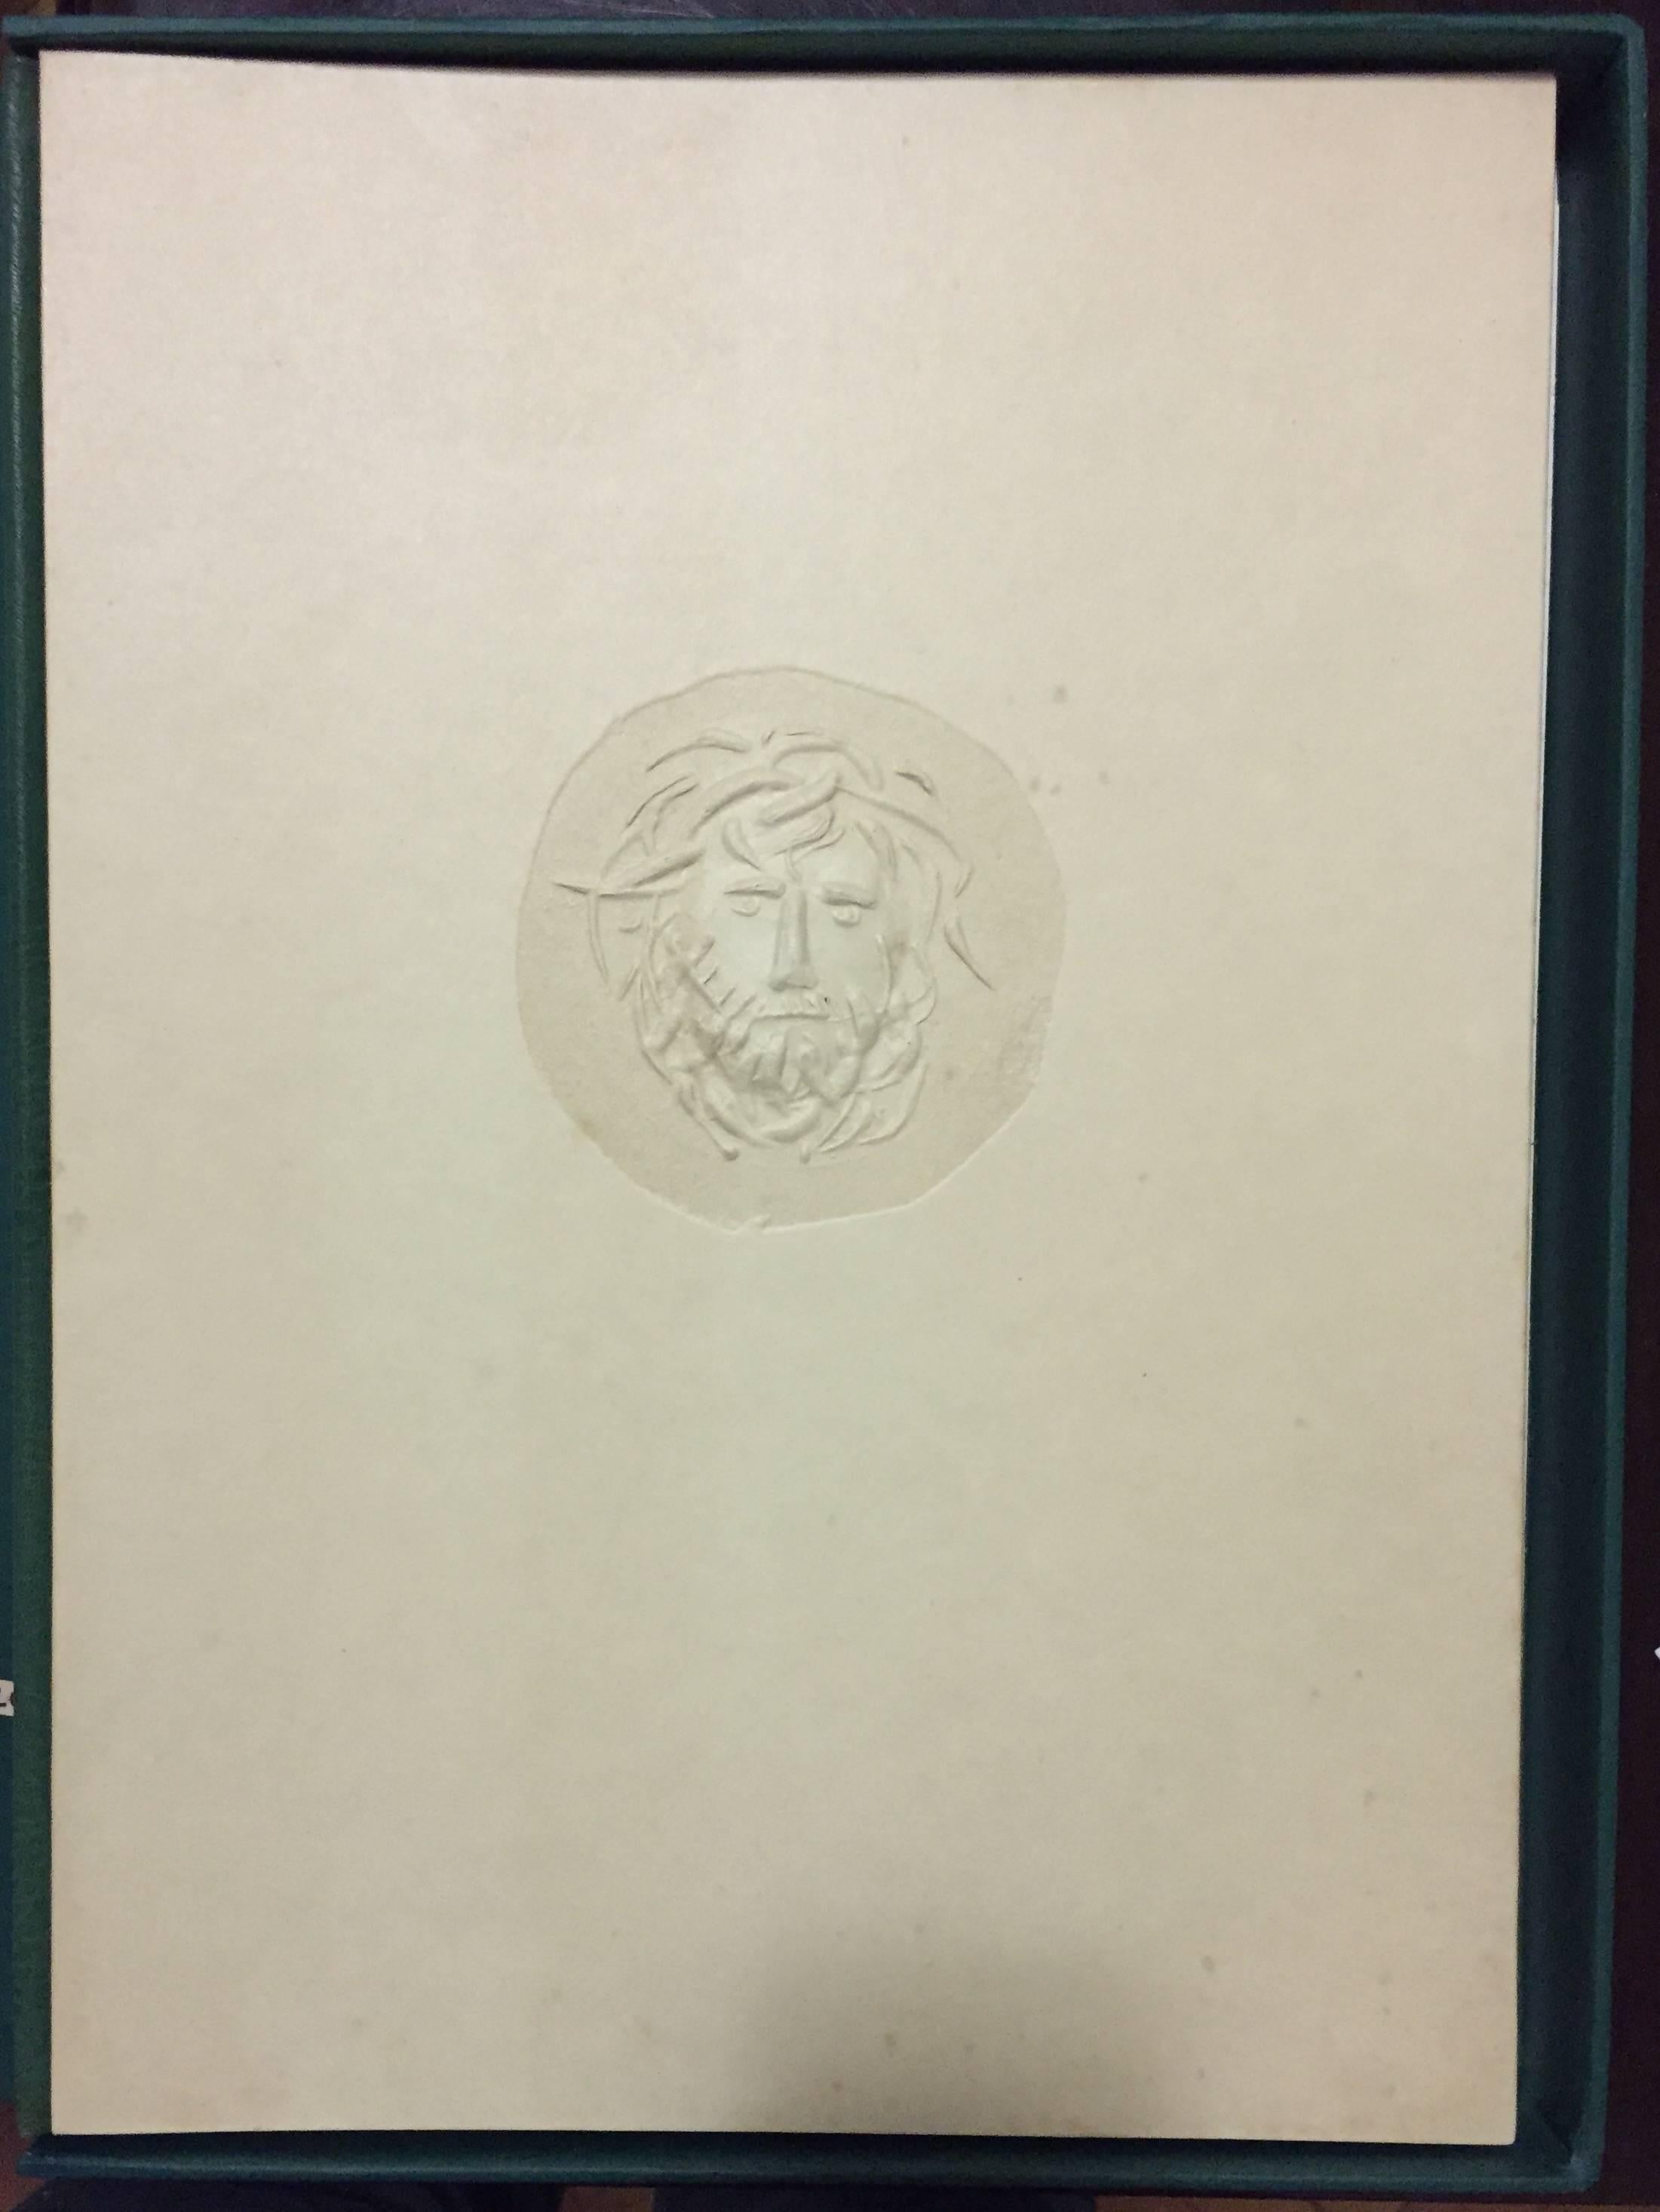 Original editorial cover with slipcase of green cardboard. On the cover, an original medallion sculptured by the artist on cardboard, showing the head / face of Oedipus in relief. Edition of 114 copies including 7 original etchings numbered and